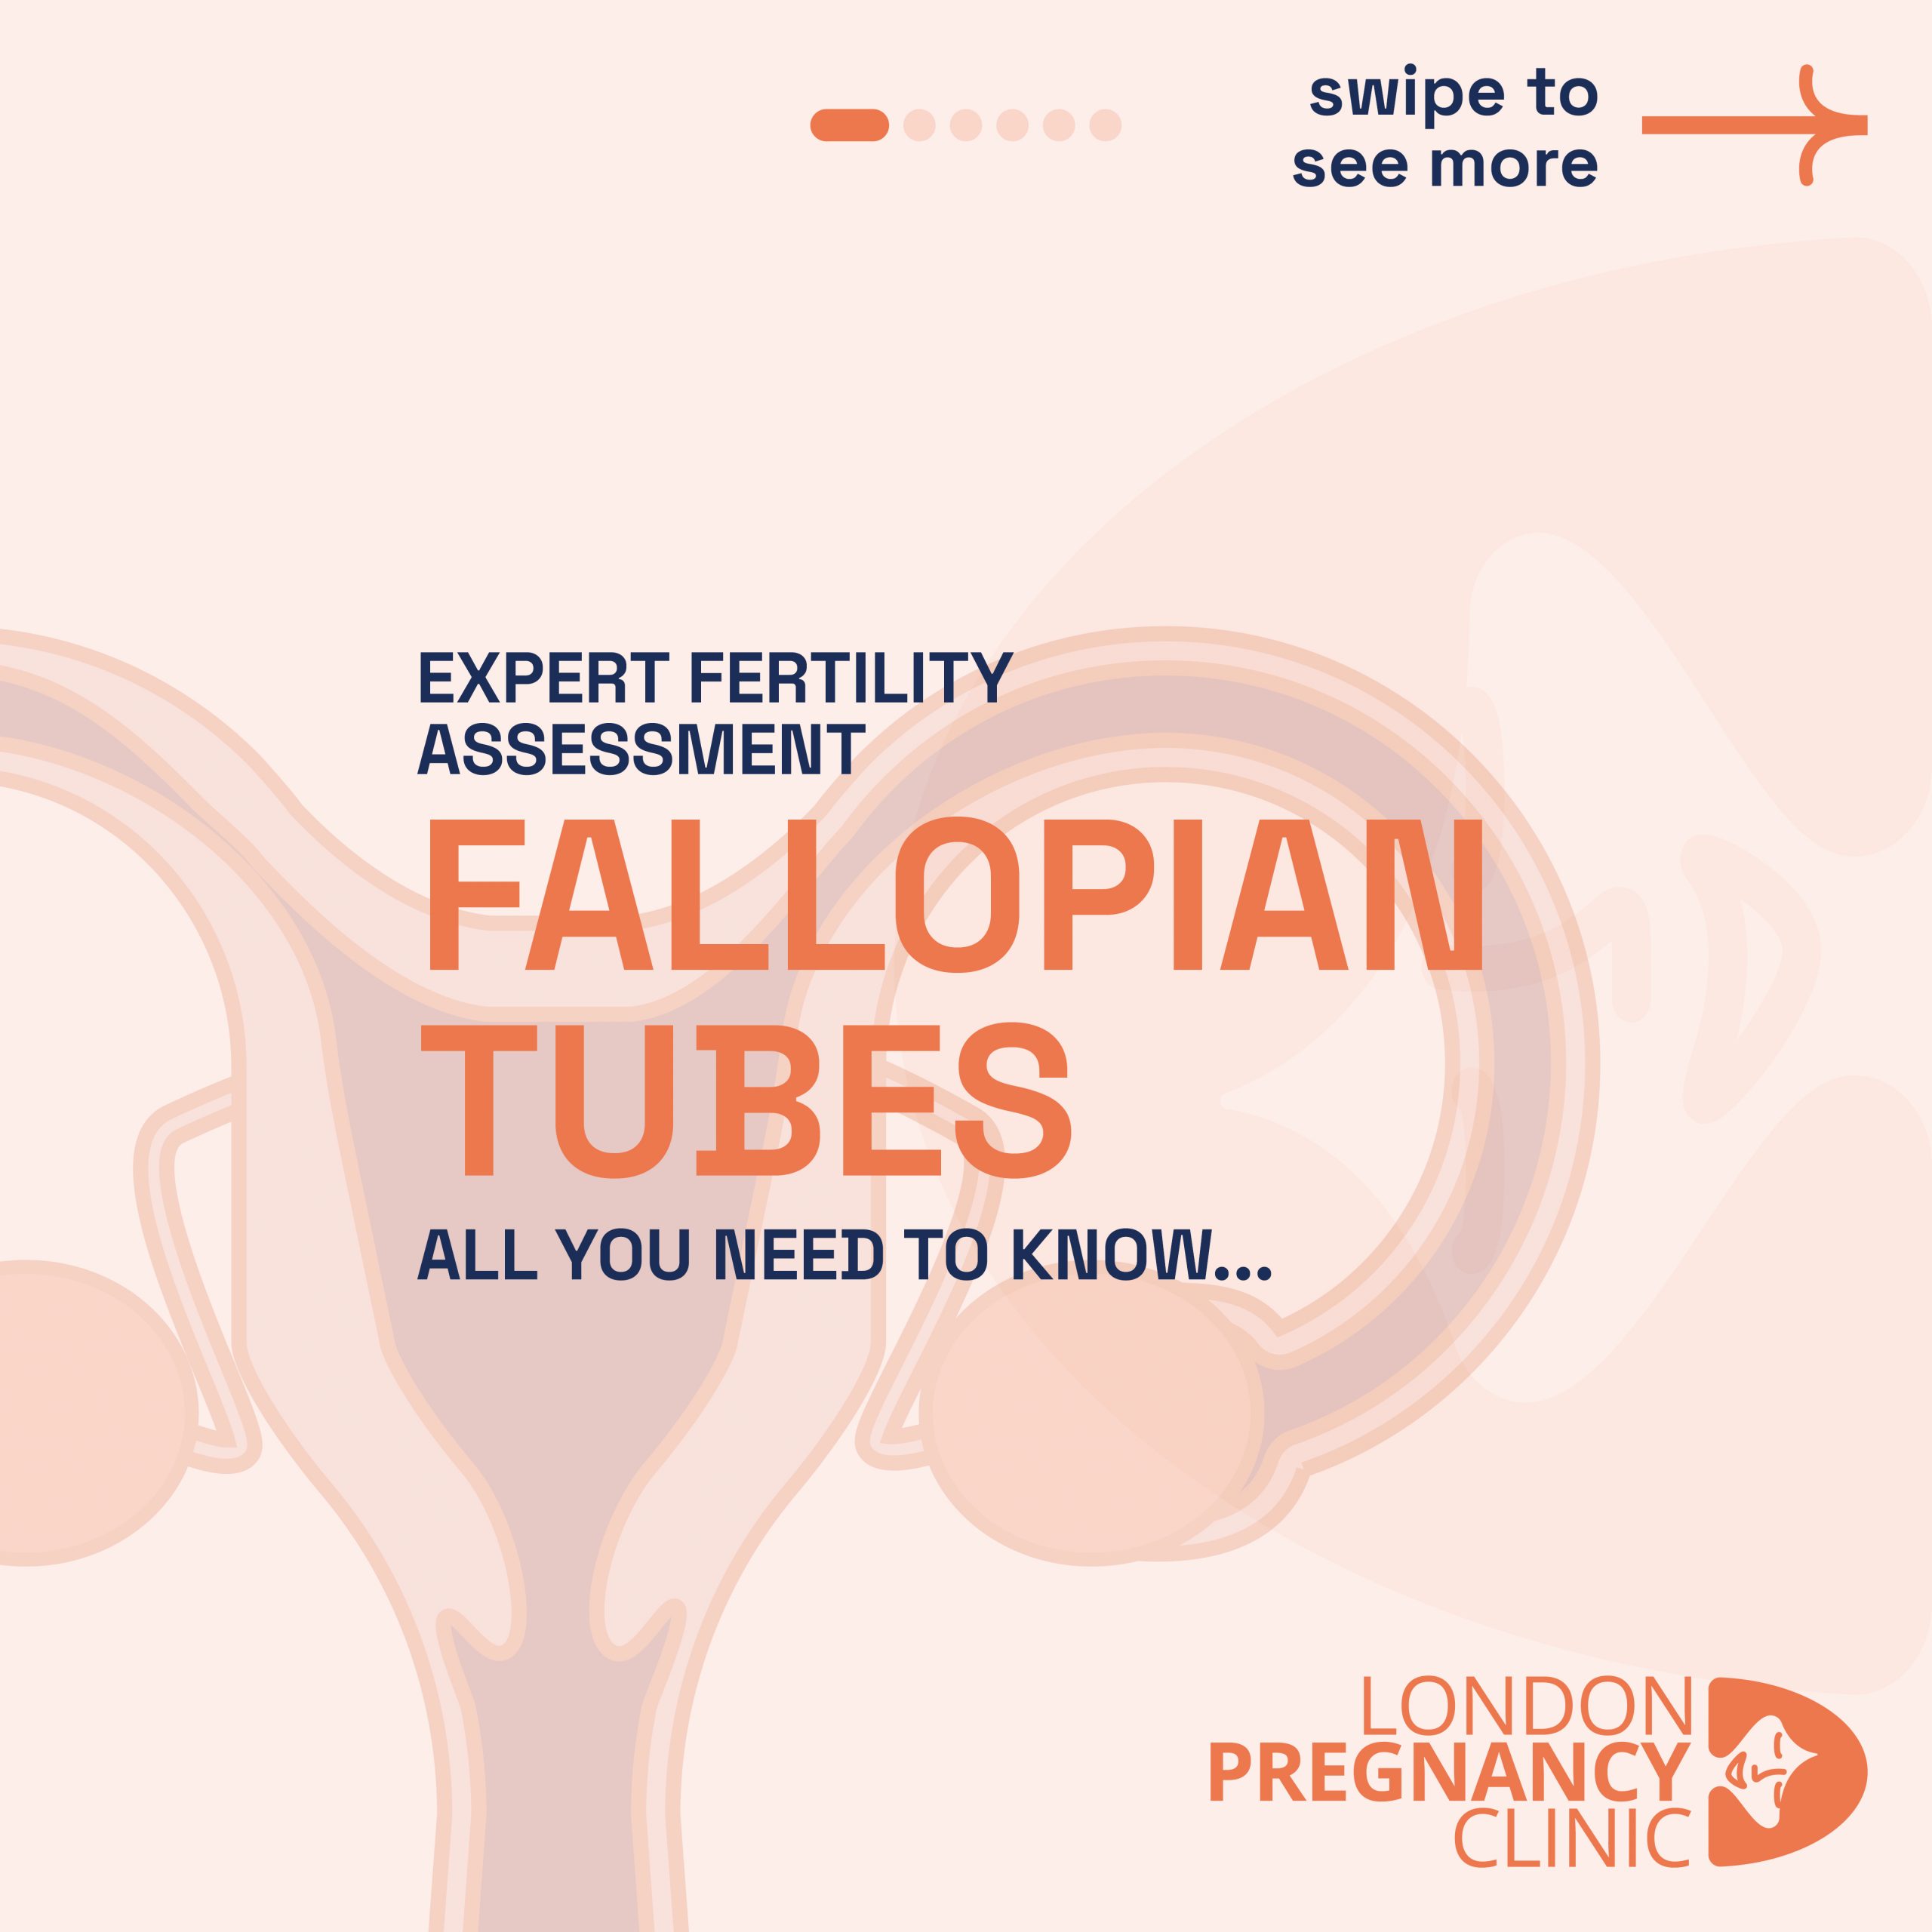 Graphic explaining the expert fertility assessment of fallopian tubes offered at London Pregnancy Clinic.